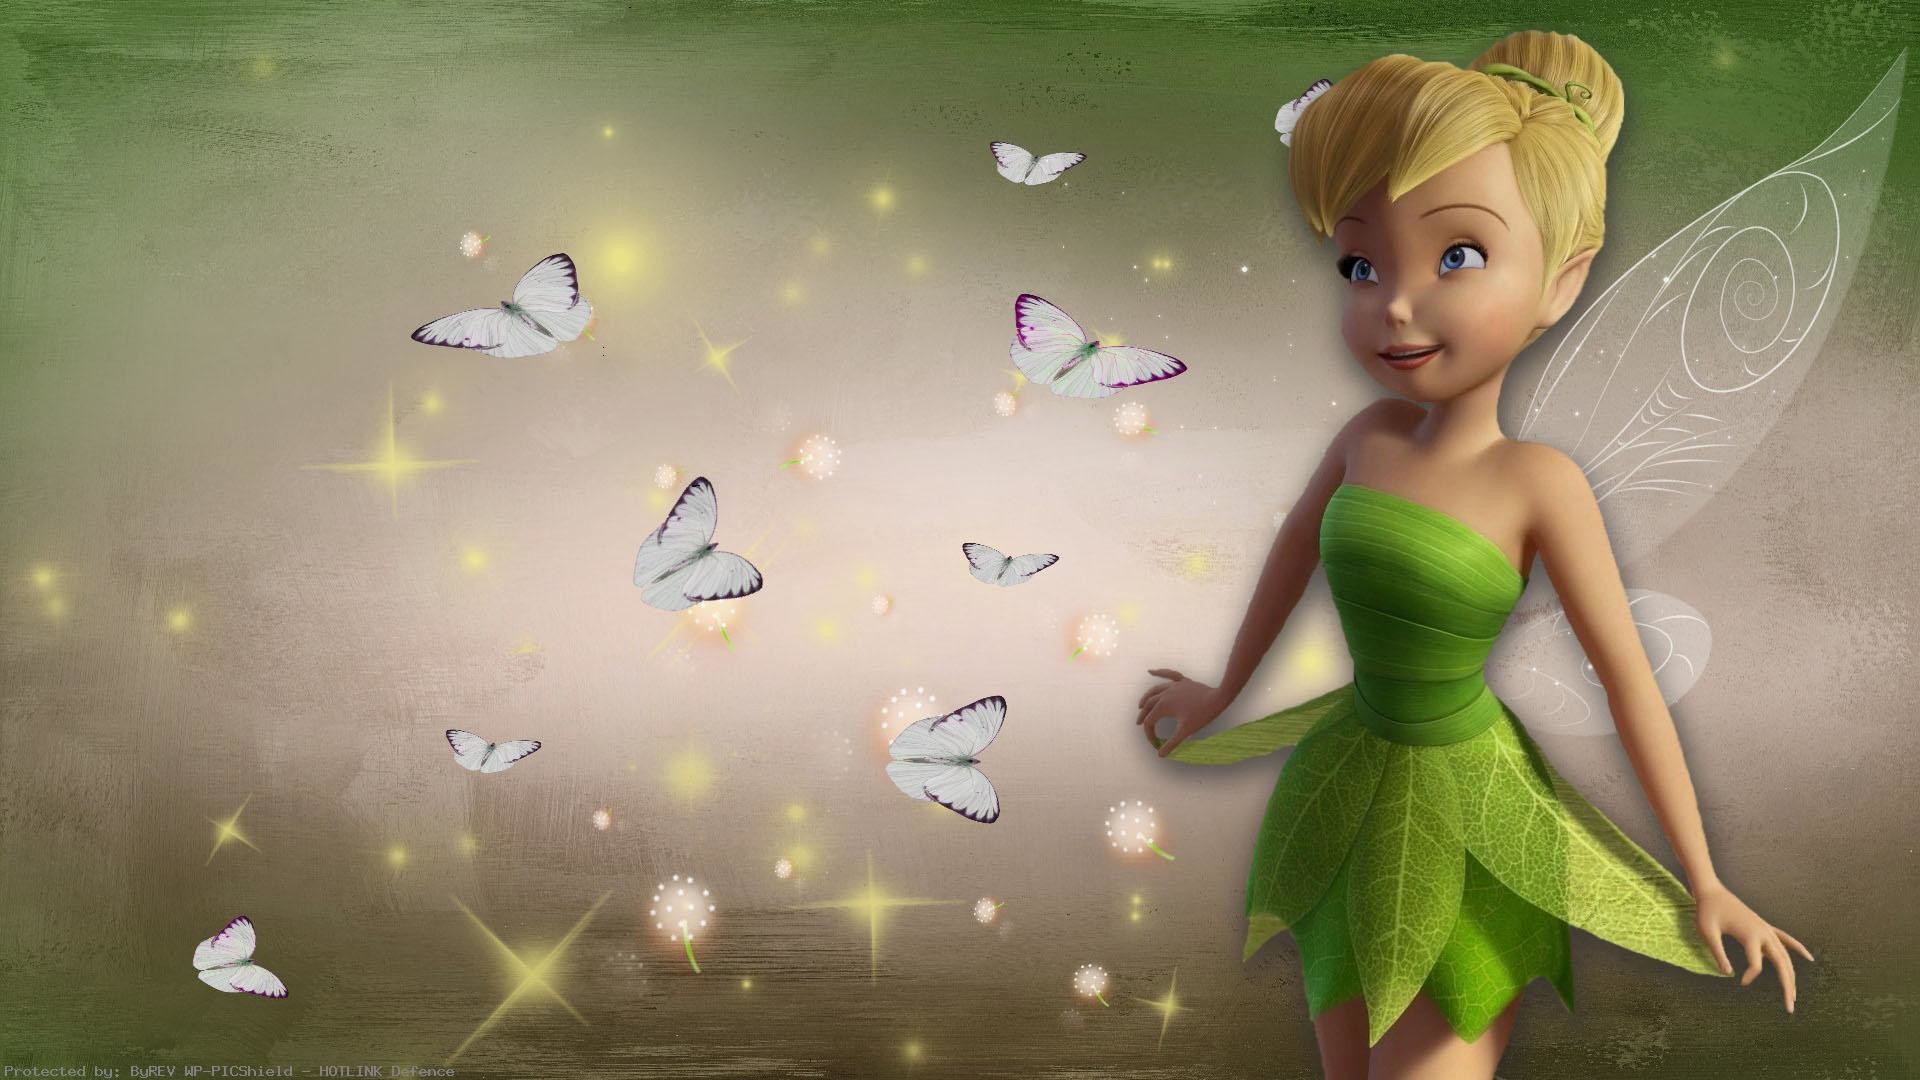 1920x1080 Tinkerbell-Full-HD-http-and-backgrounds-net-tinkerbell-